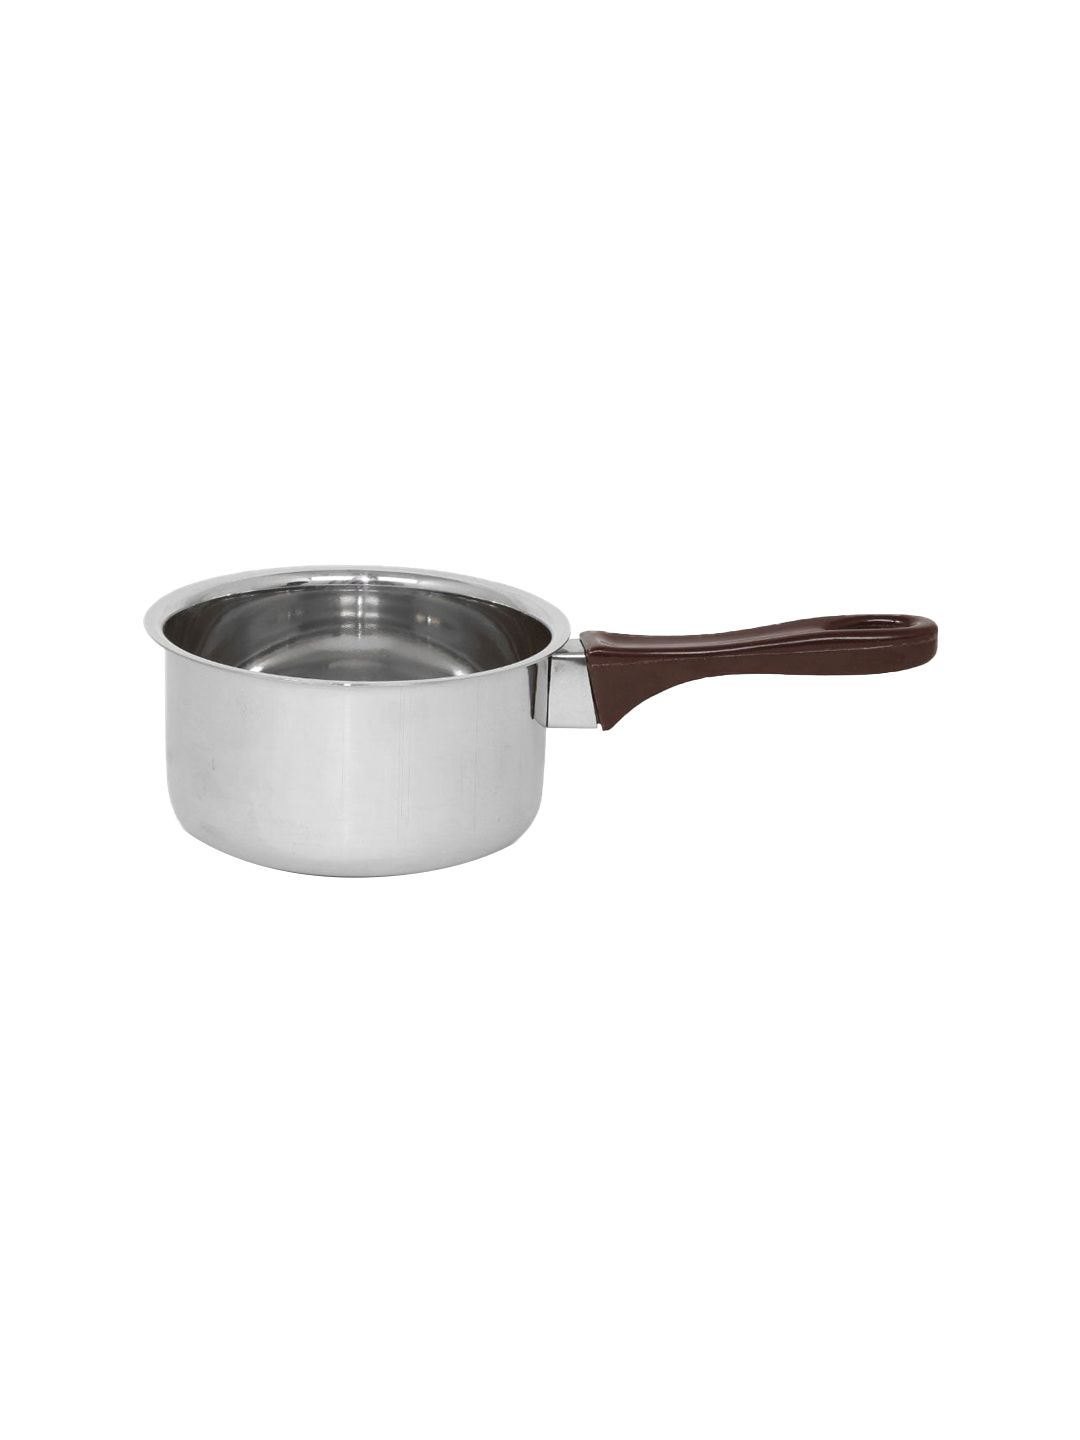 Athome by Nilkamal Grey Milkpan Wdout Induction Black Handle Price in India